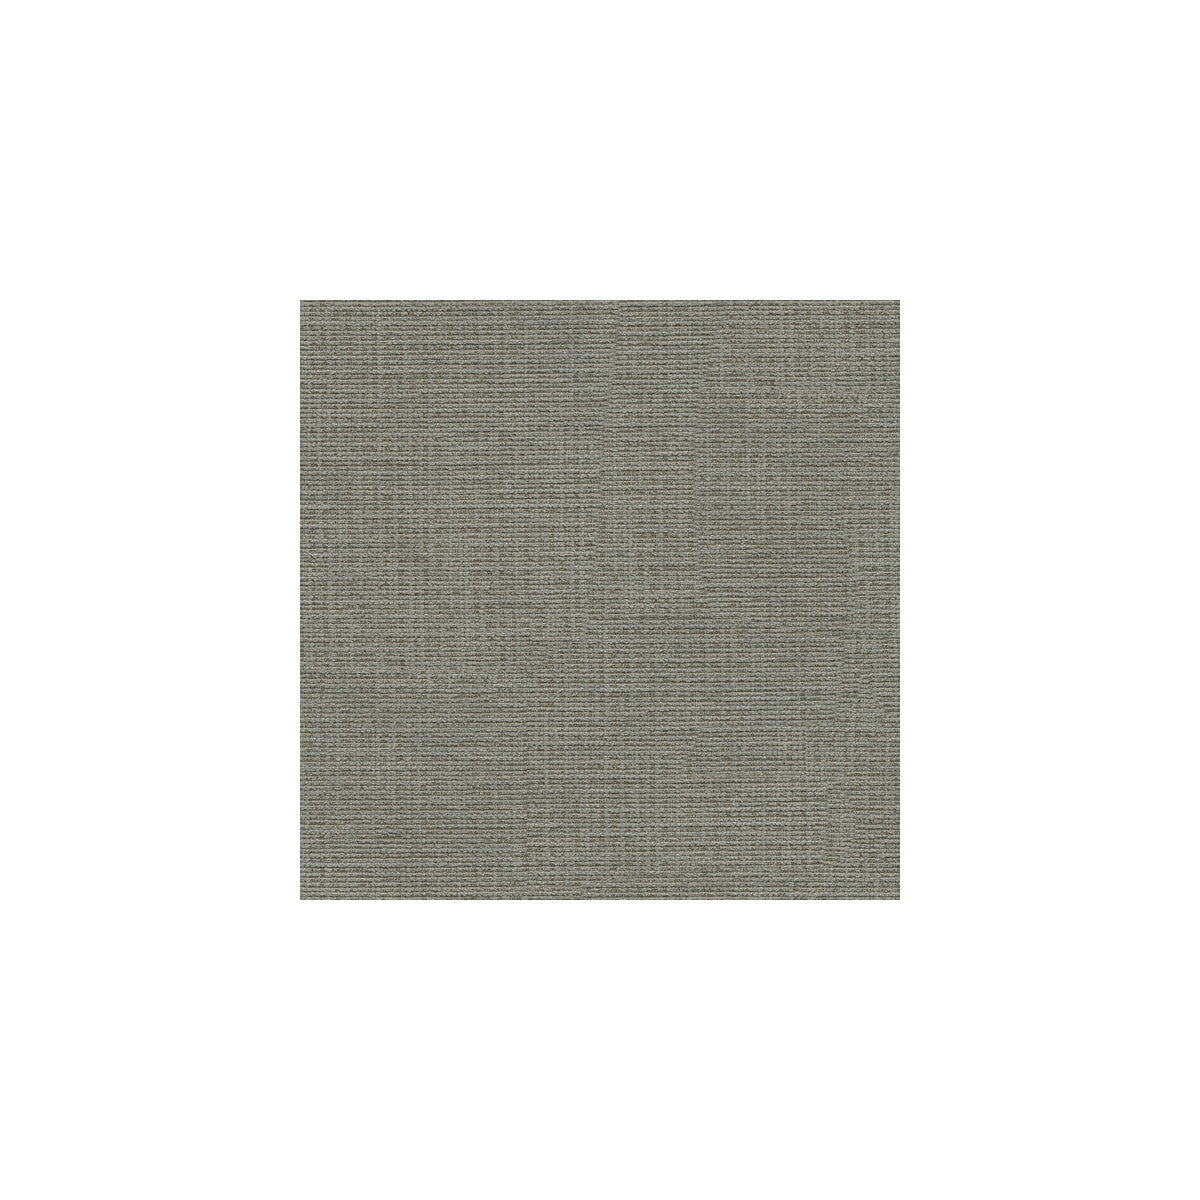 Kravet Basics fabric in 32314-52 color - pattern 32314.52.0 - by Kravet Basics in the Perfect Plains collection